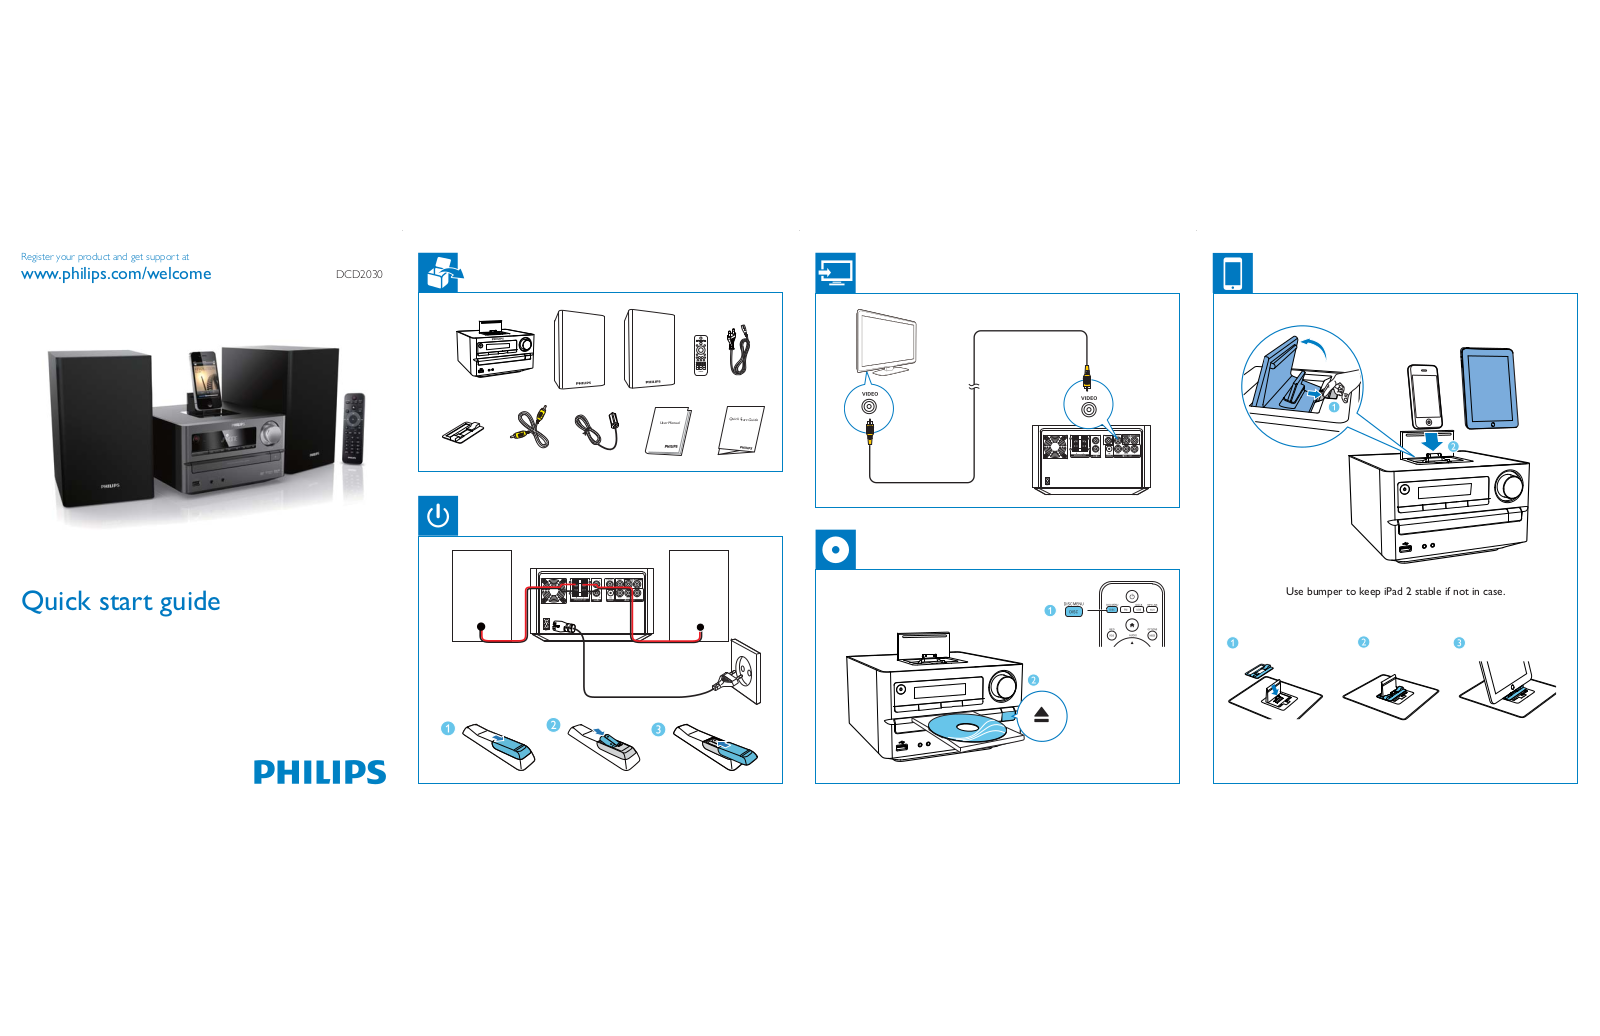 Philips DCM2030 User Guide